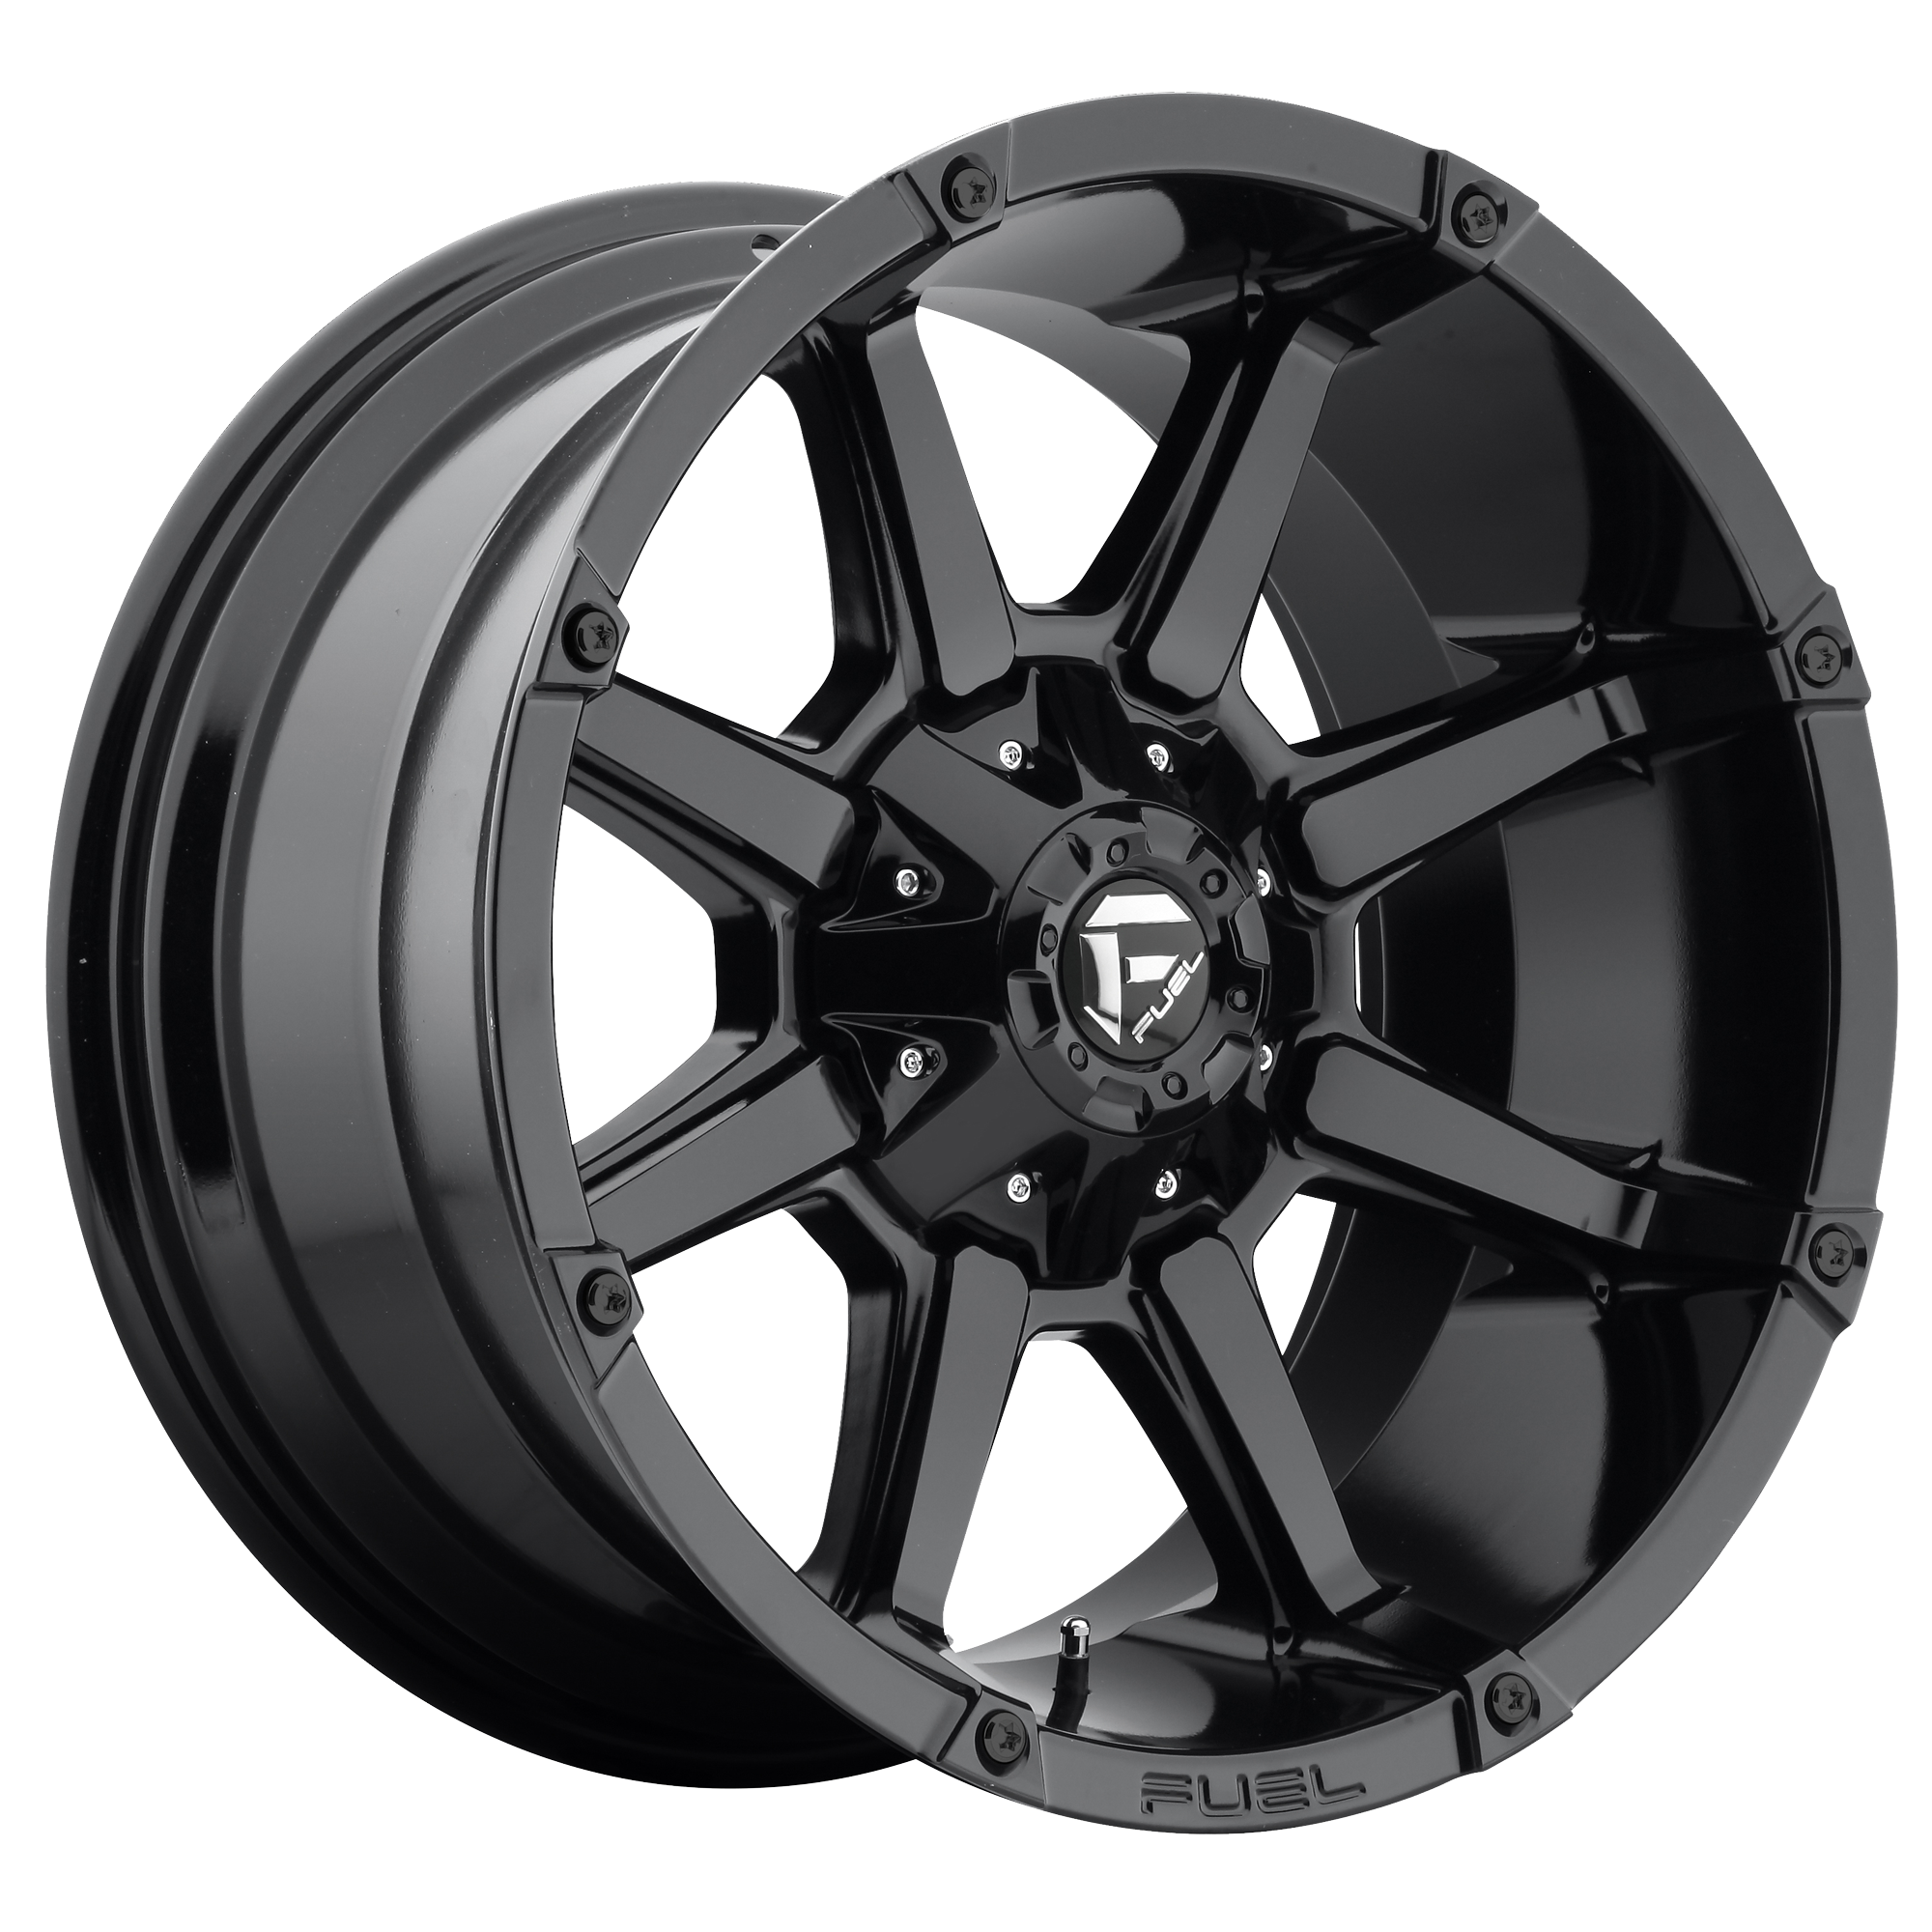 COUPLER 20x10 5x114.30/5x127.00 GLOSS BLACK (-24 mm) - Tires and Engine Performance